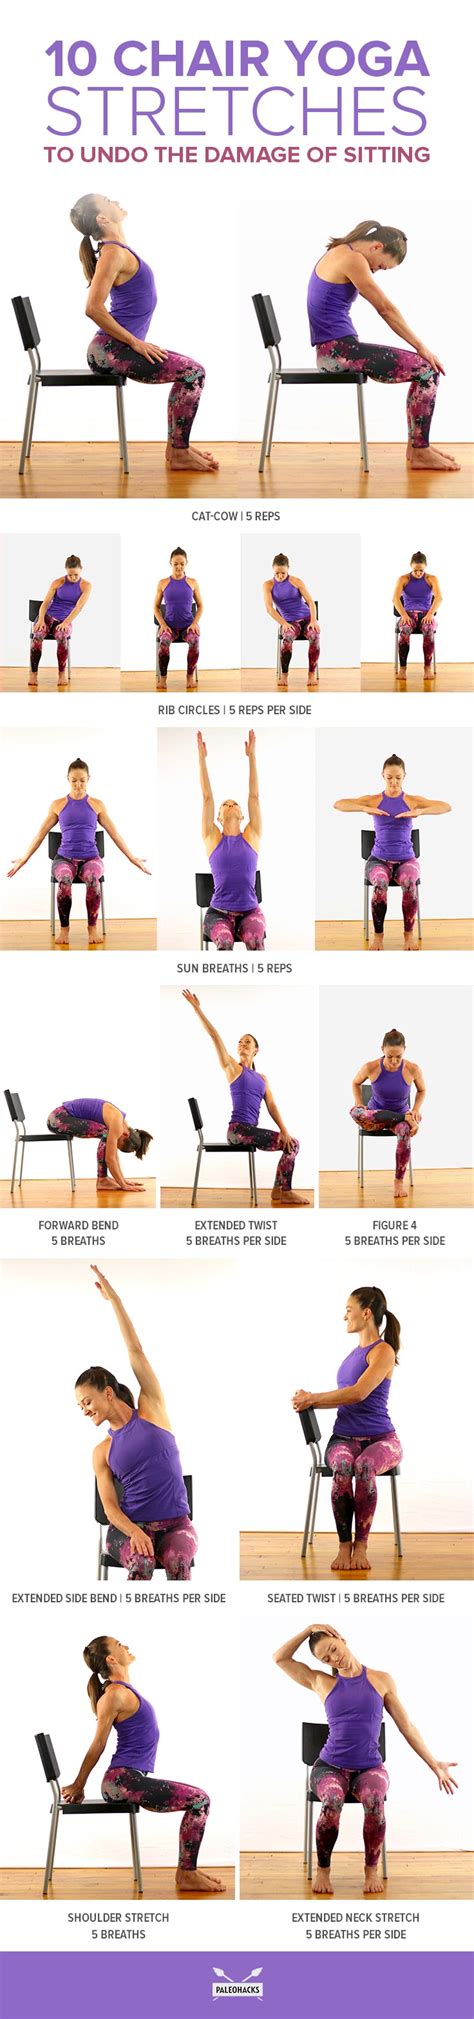 Yoga In Chair Exercises OFF